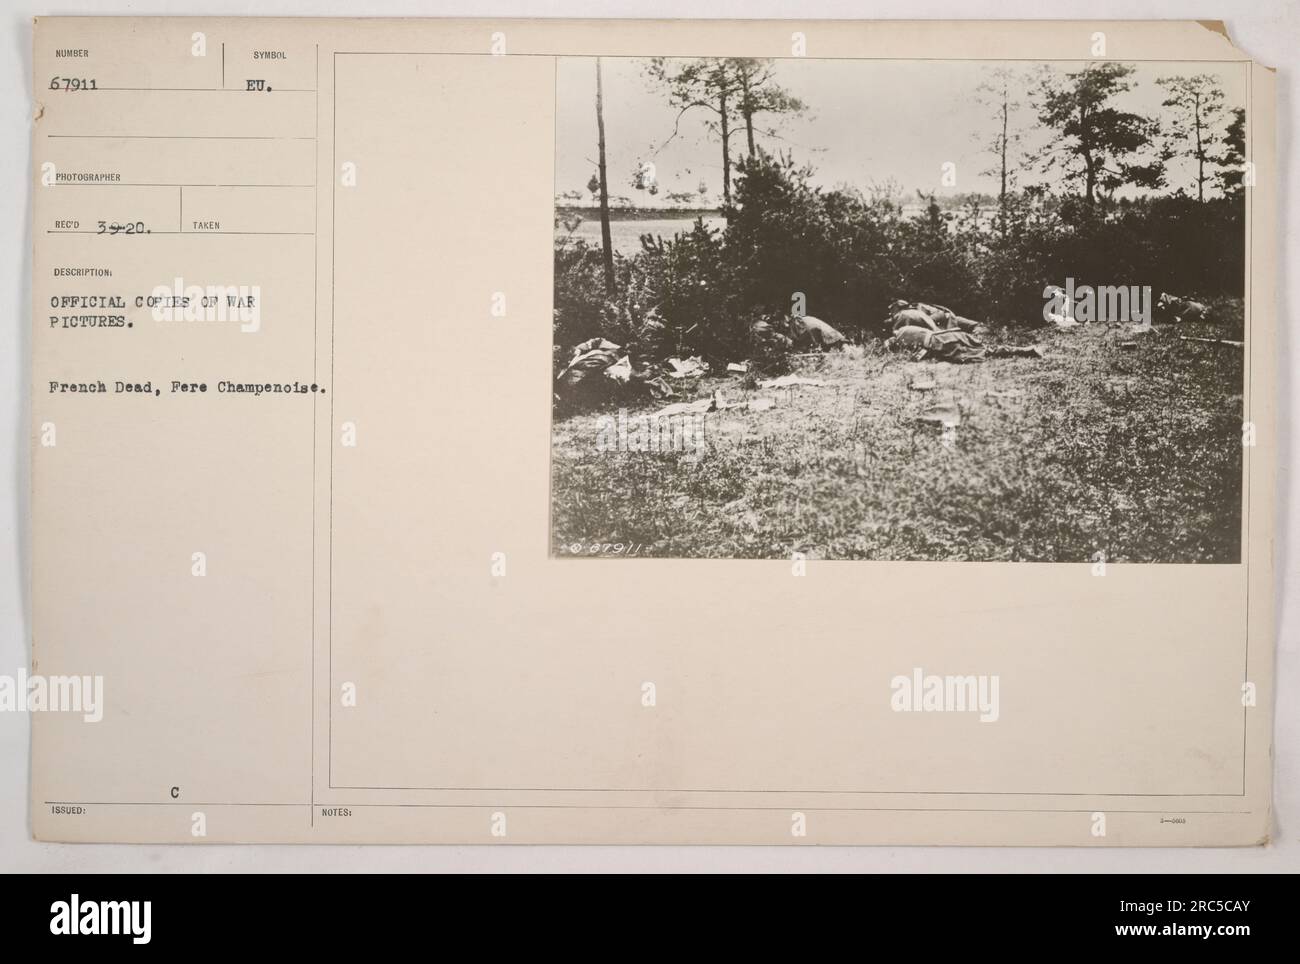 'Official copies of war pictures showing French soldiers killed in action at Fere Champenoise. The picture is numbered 67911 and was received by the photographer on 39-20. The description symbol represents the official nature of these copies. The location of the photograph is noted as Pere Champenoise.' Stock Photo